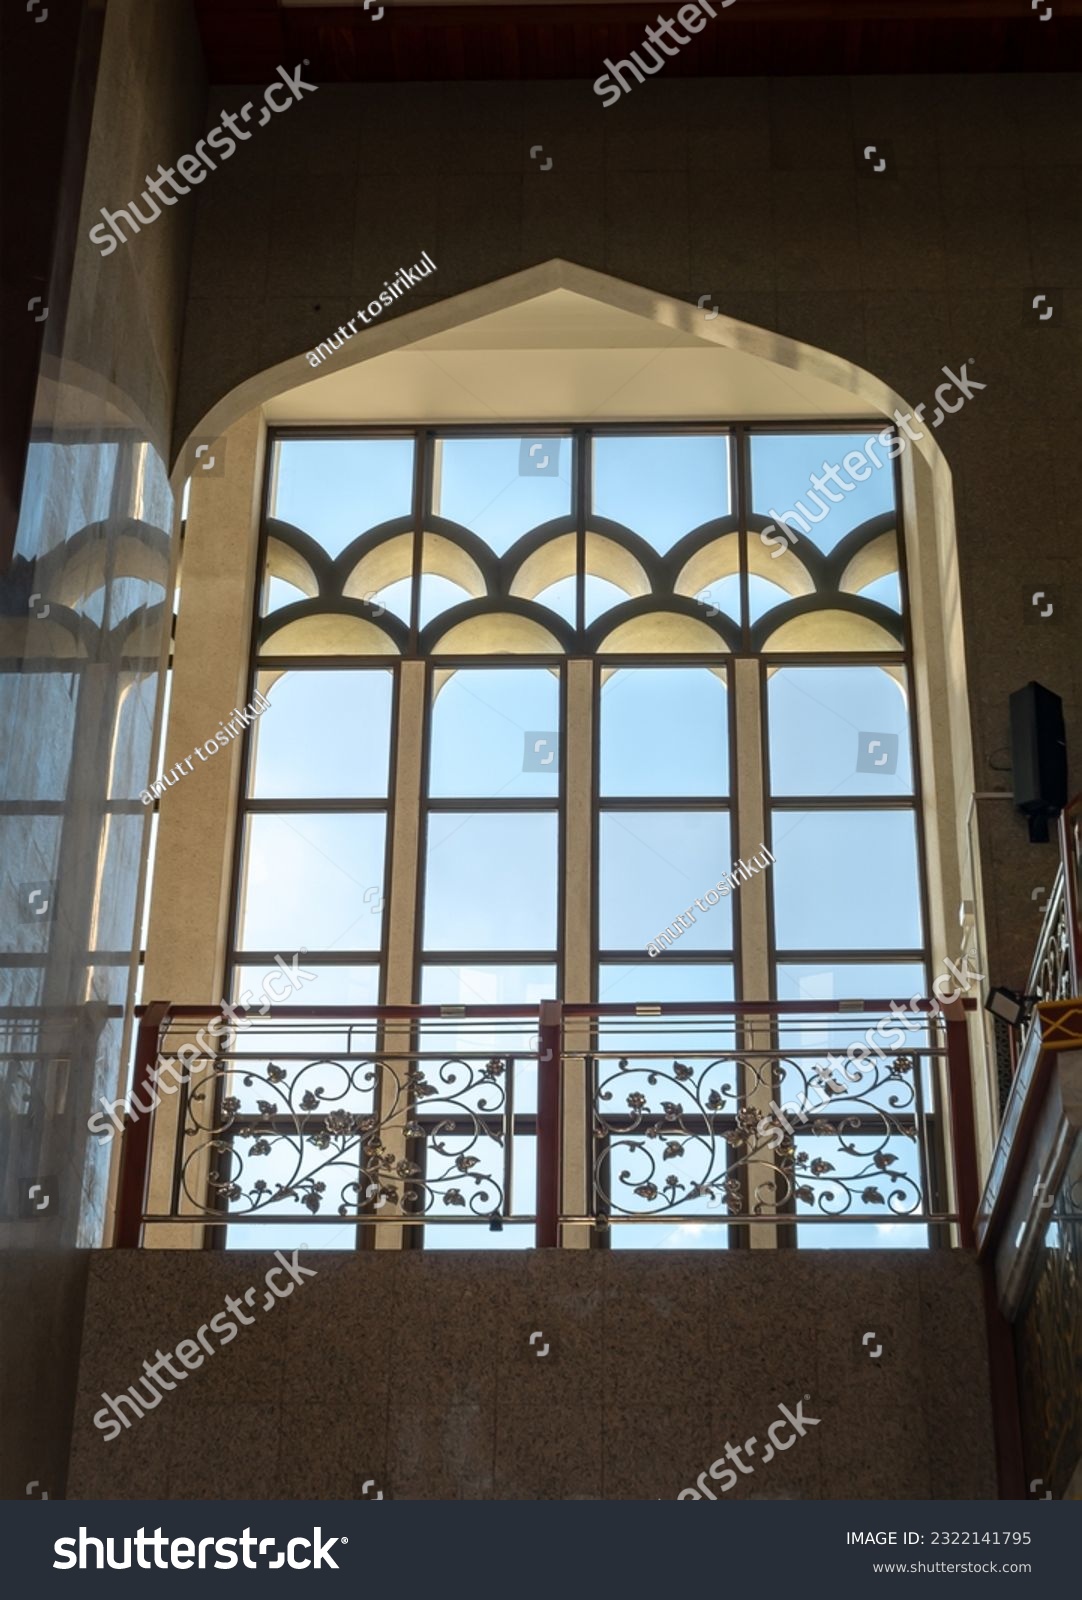 The sunshine lights through the glass window frame and there have wrought iron decorative rails patterns in the corridor. Architecture of Interior Building is built for the Islamic Affairs.art concept #2322141795